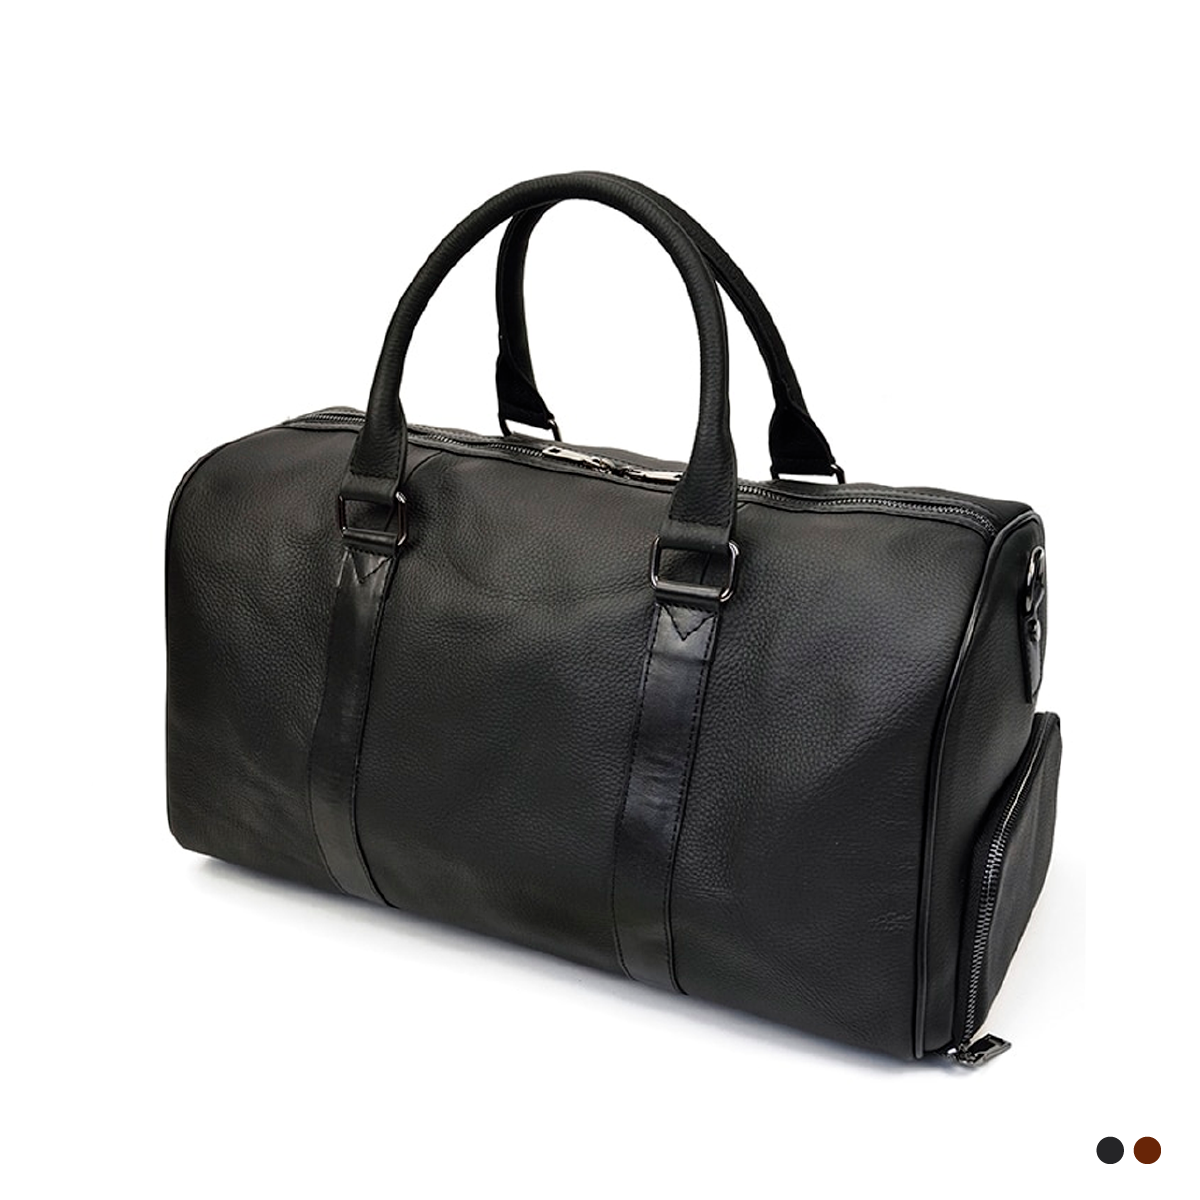 Sober genuine leather men's hand luggage. - CLUB OF BAGS